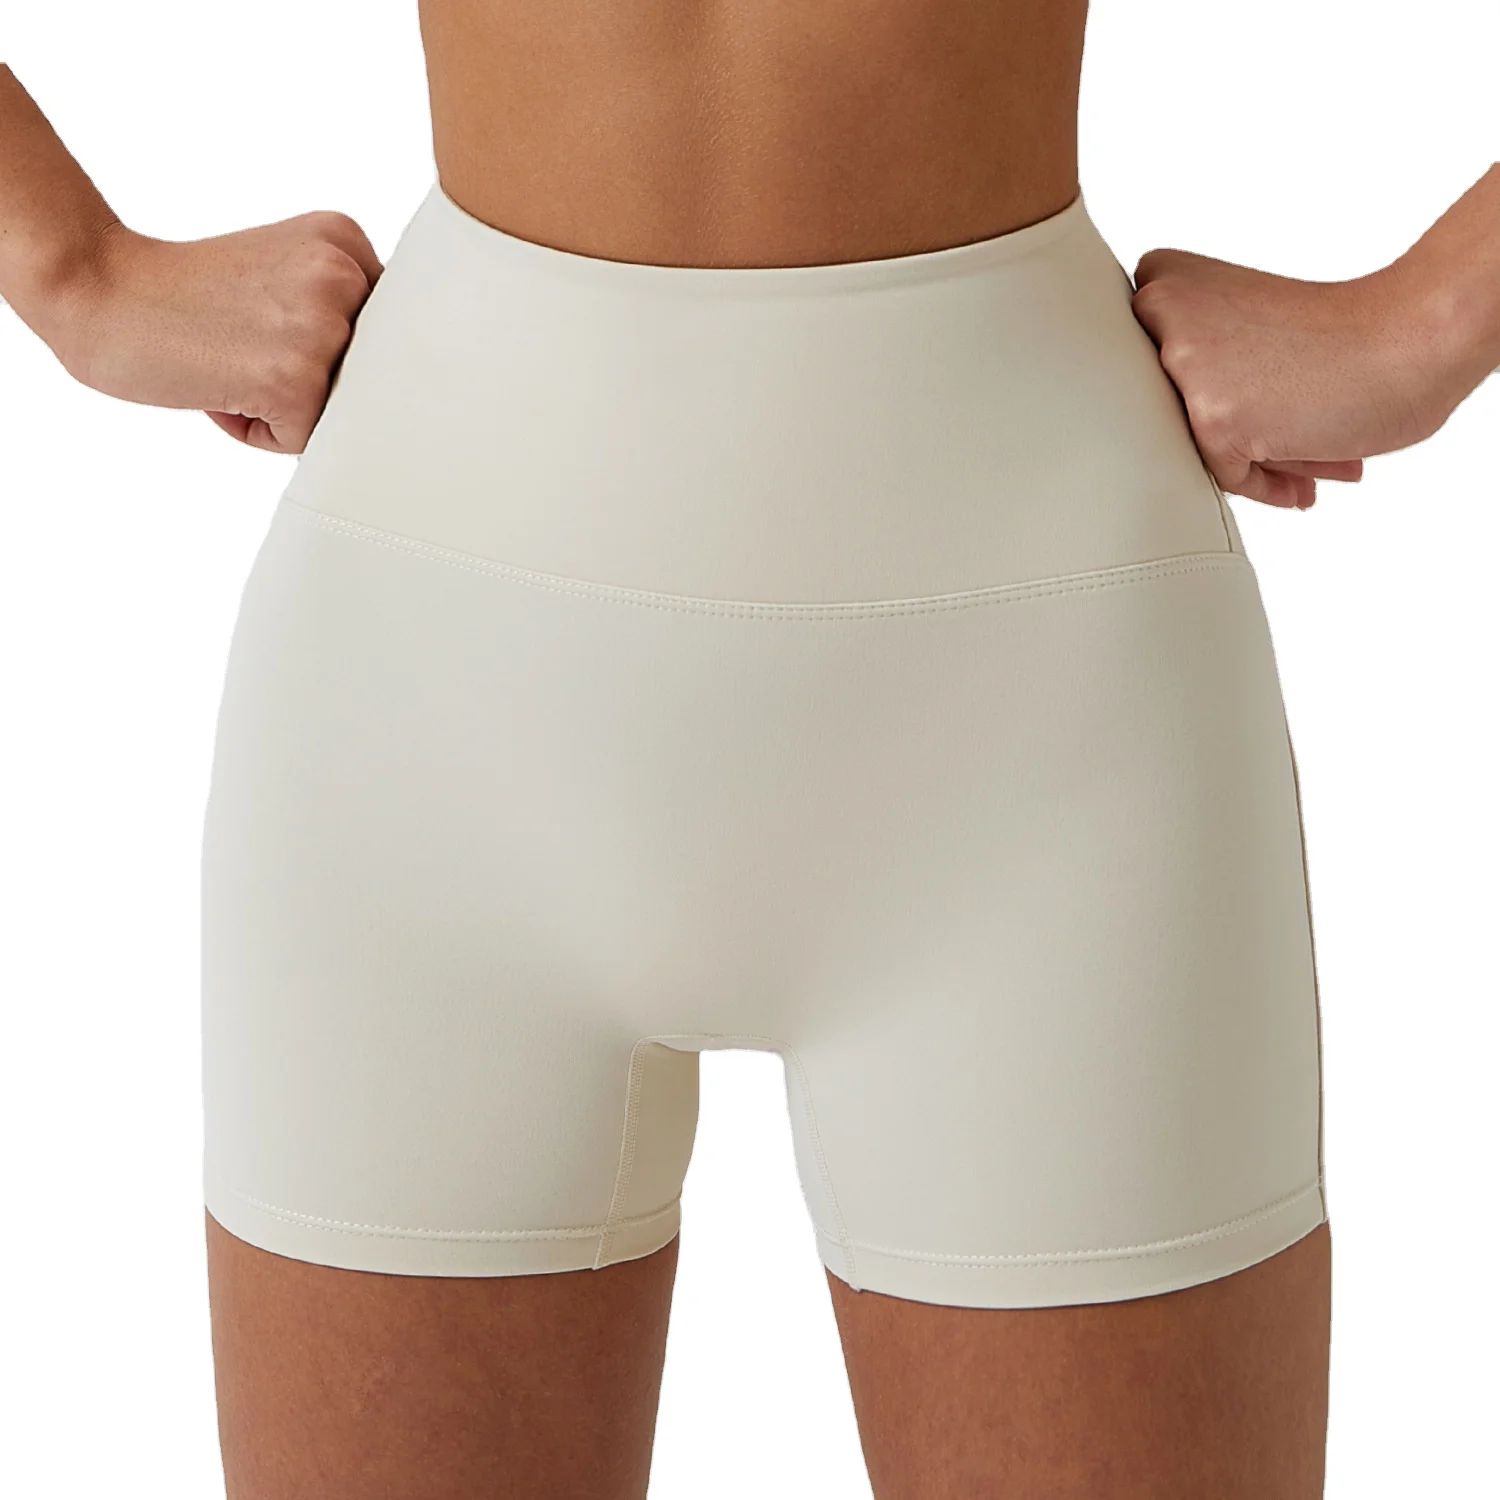 

Eco-friendly Recycled High-waist Yoga Shorts Tight-fitting Sports Shorts for Women Naked-feel Running and Fitness shorts